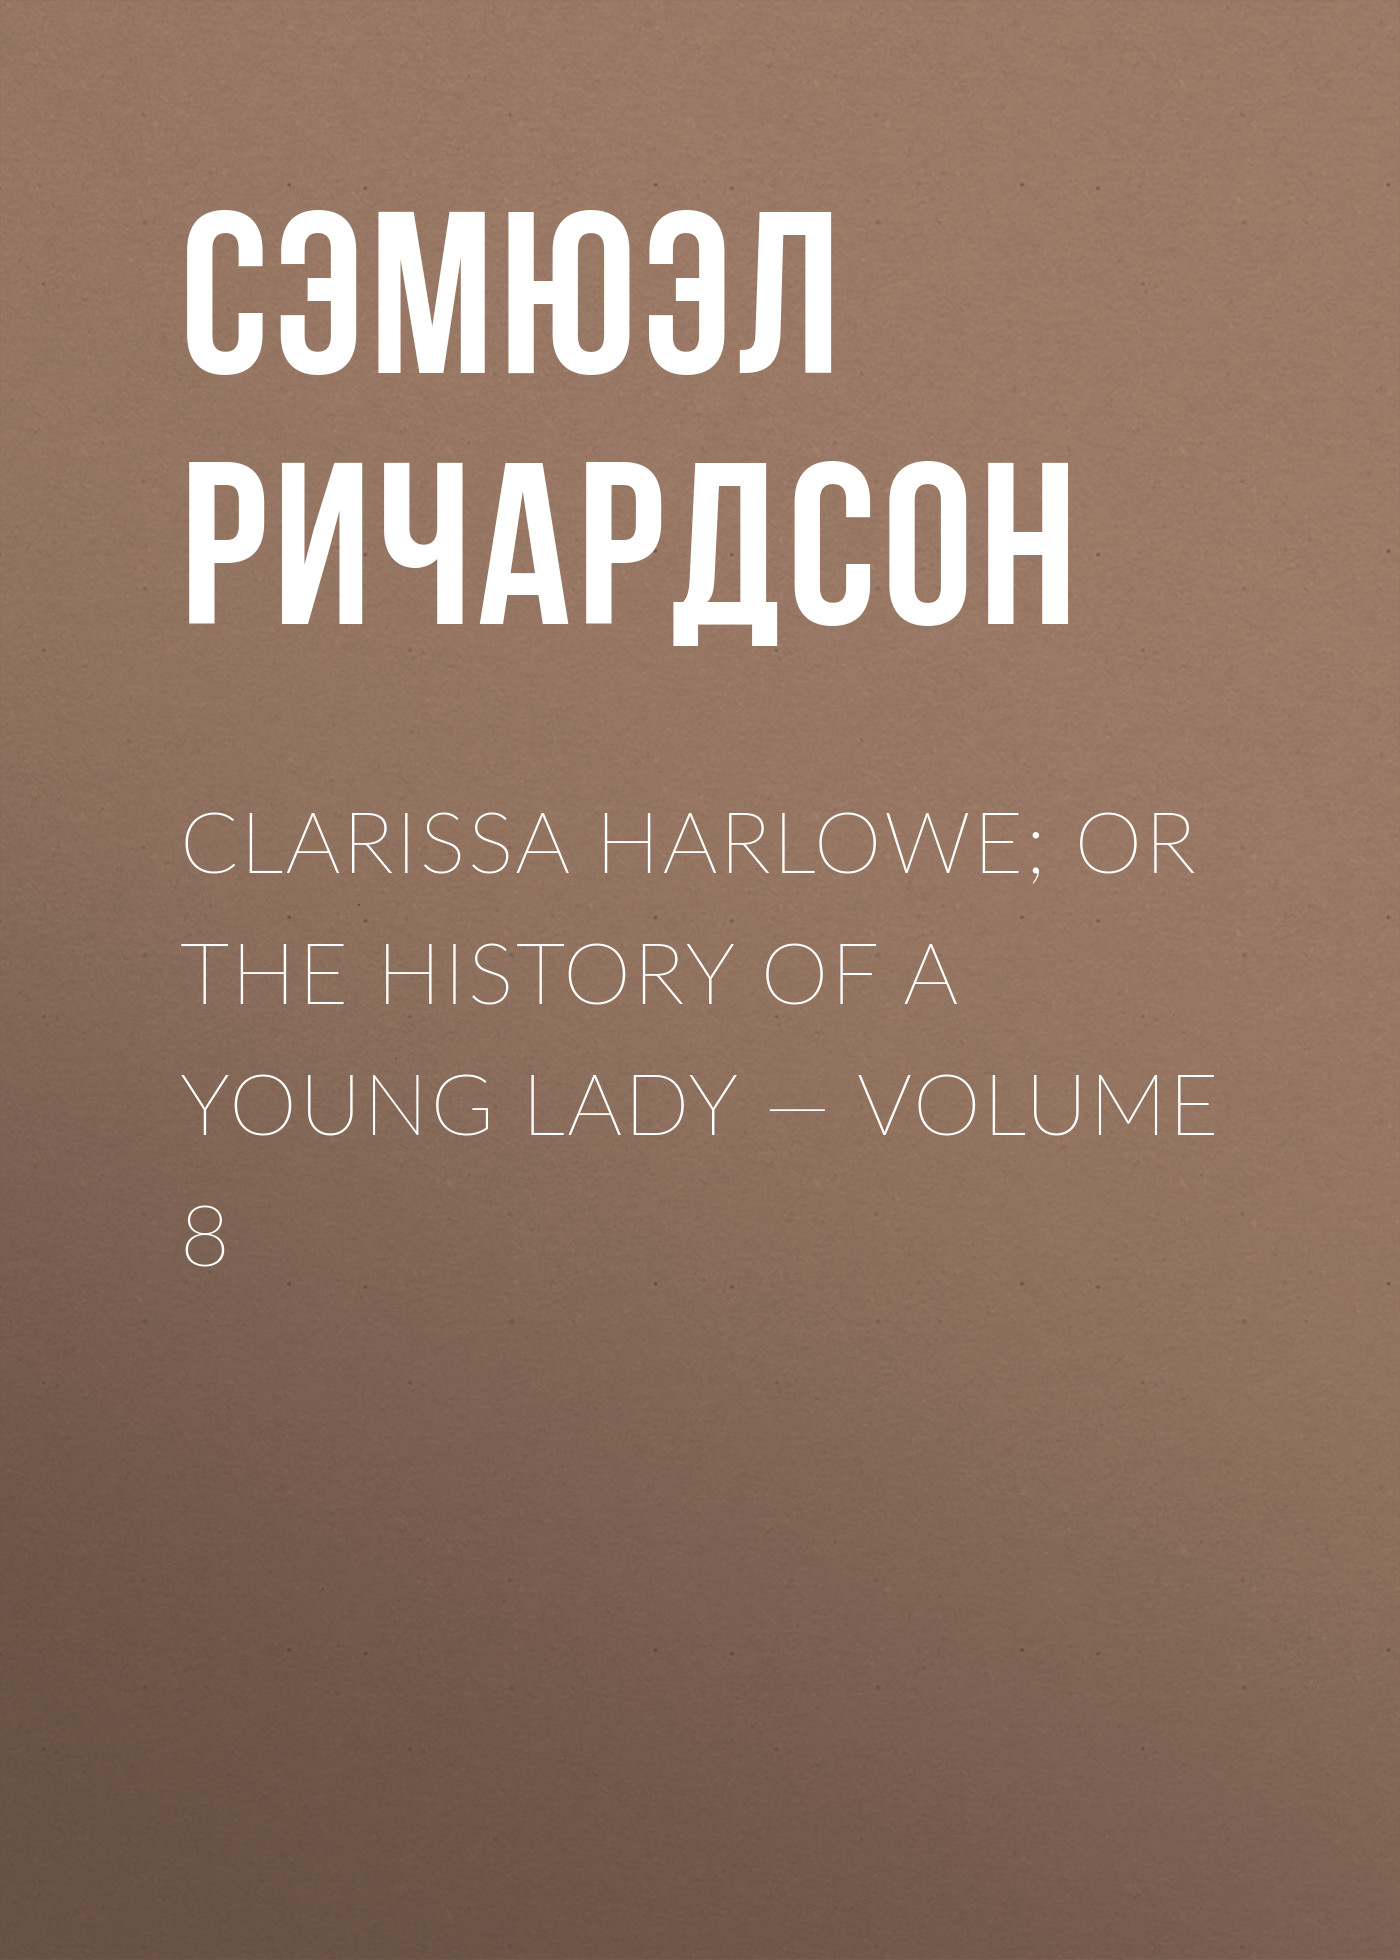 Clarissa Harlowe; or the history of a young lady— Volume 8